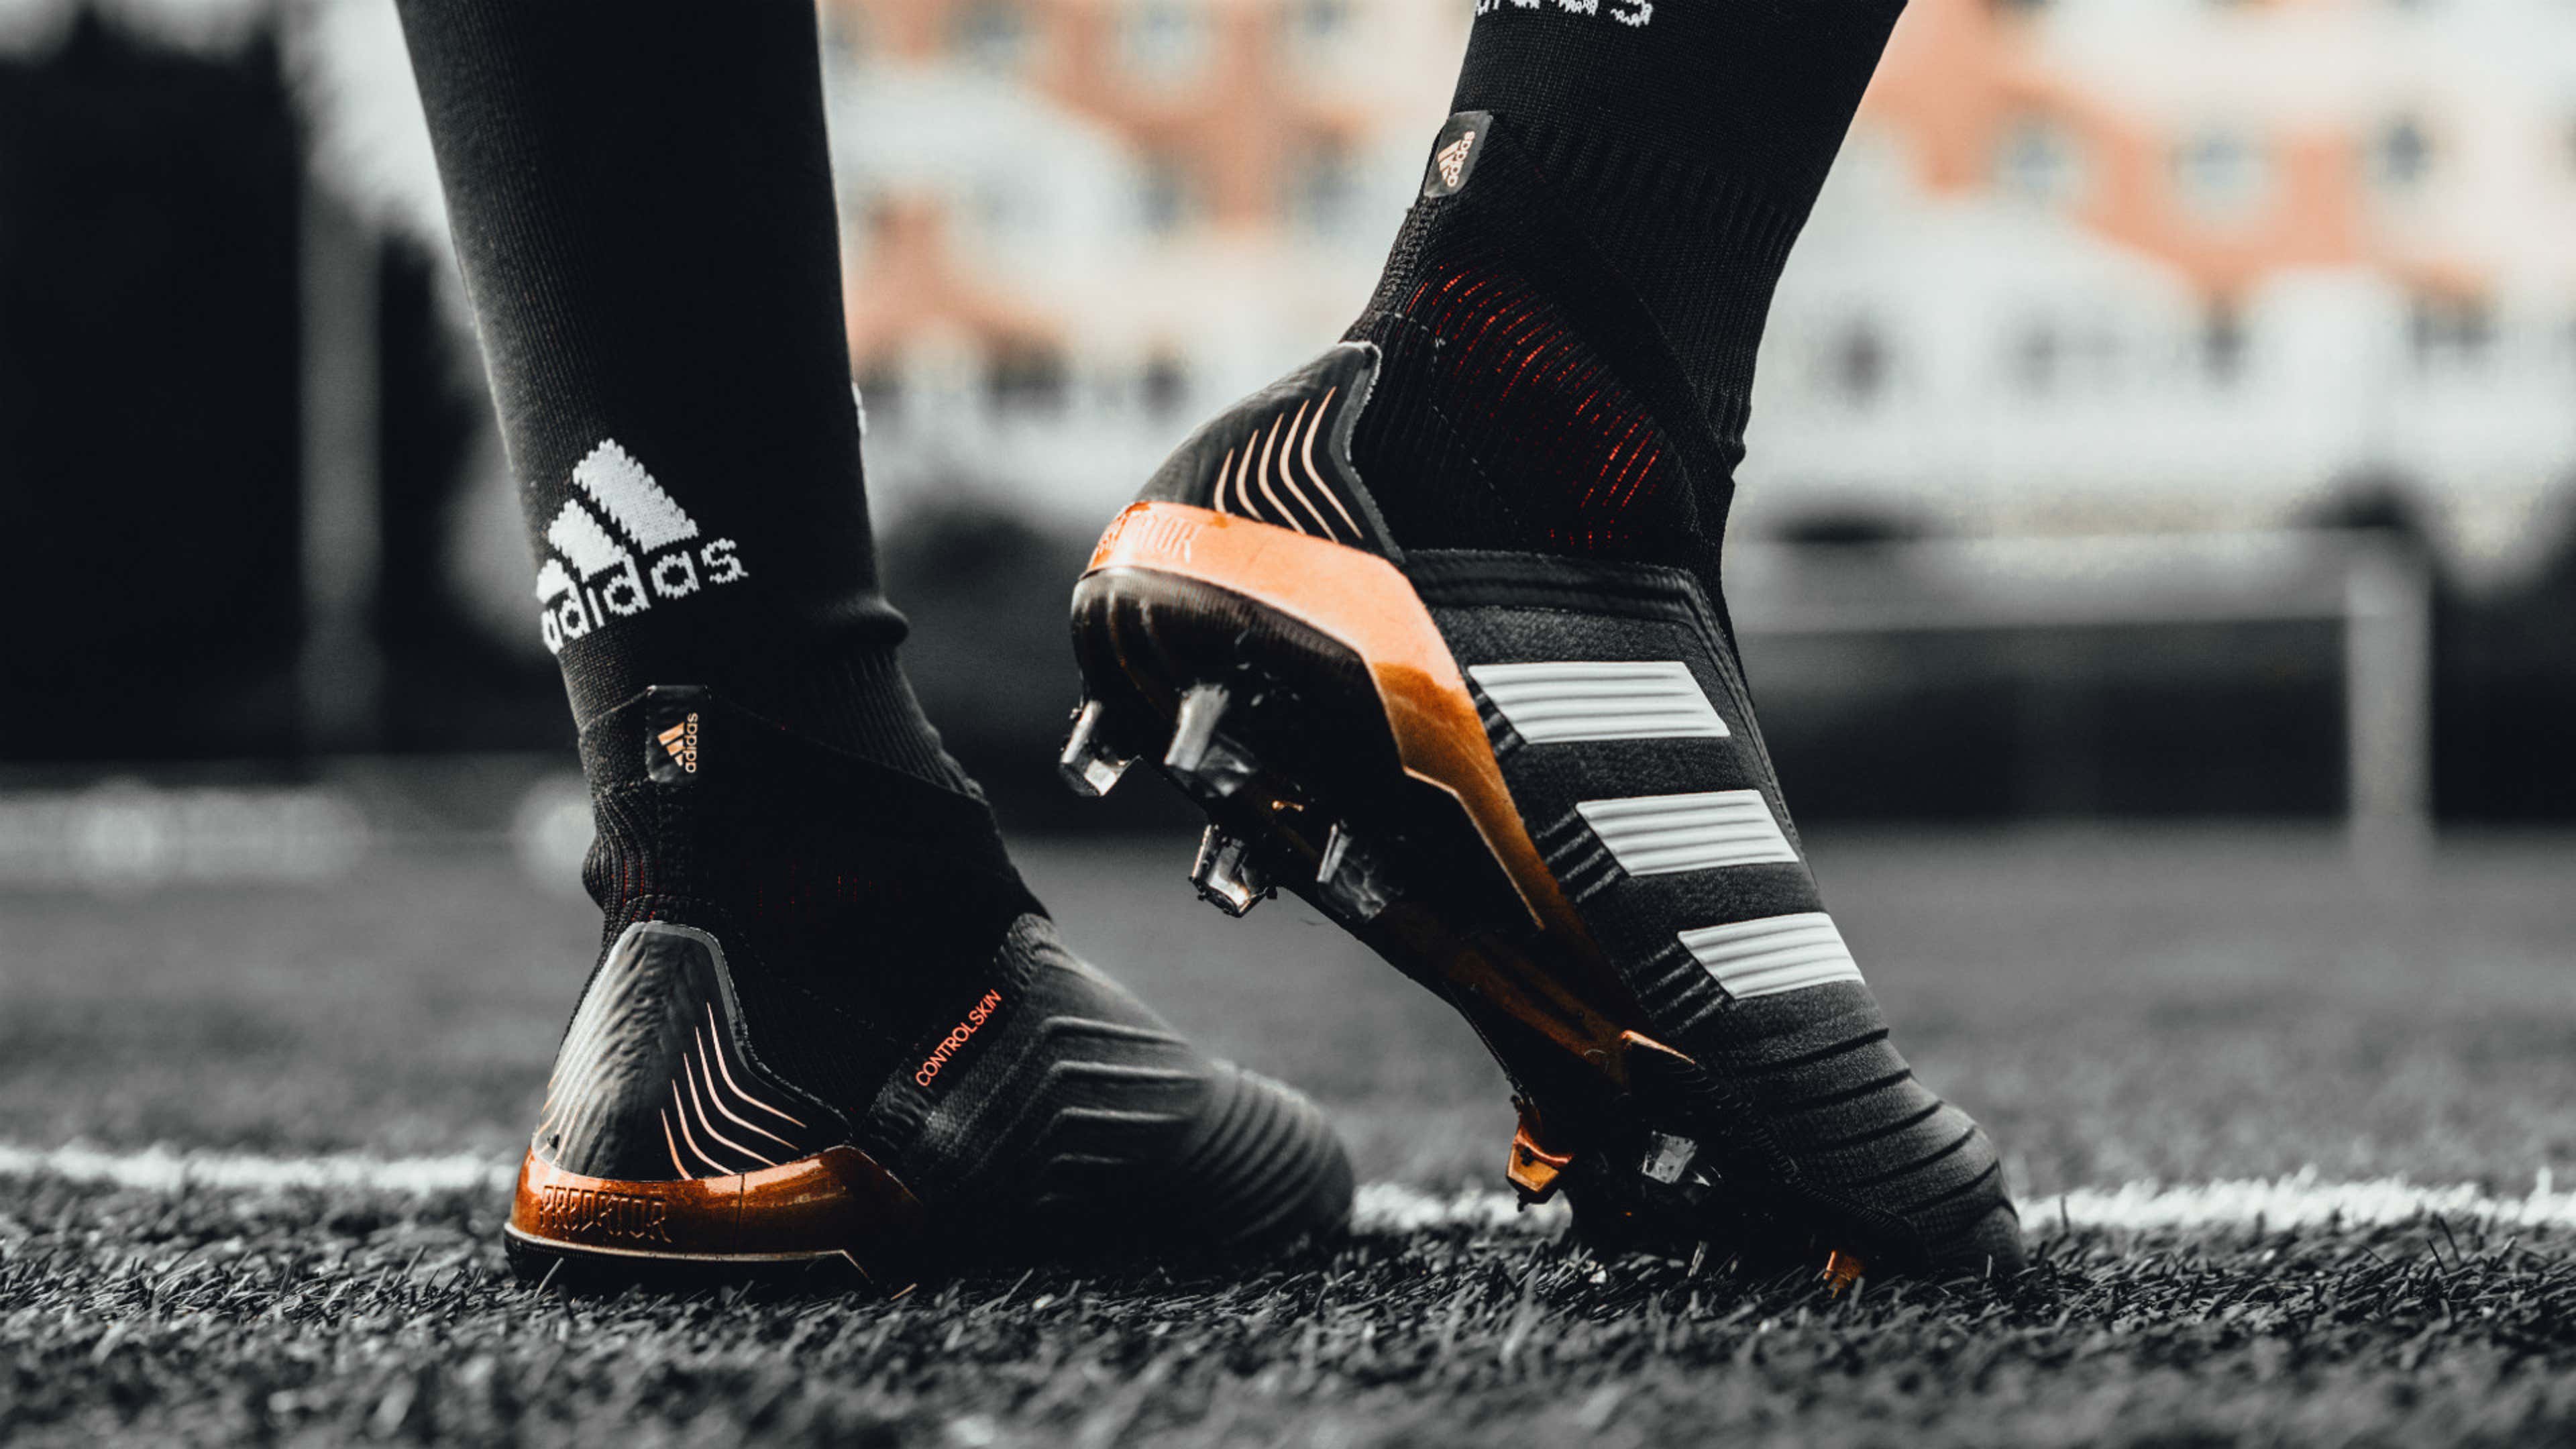 Adidas 18+: Iconic boots re-launched for Pogba, Ozil Goal.com Uganda